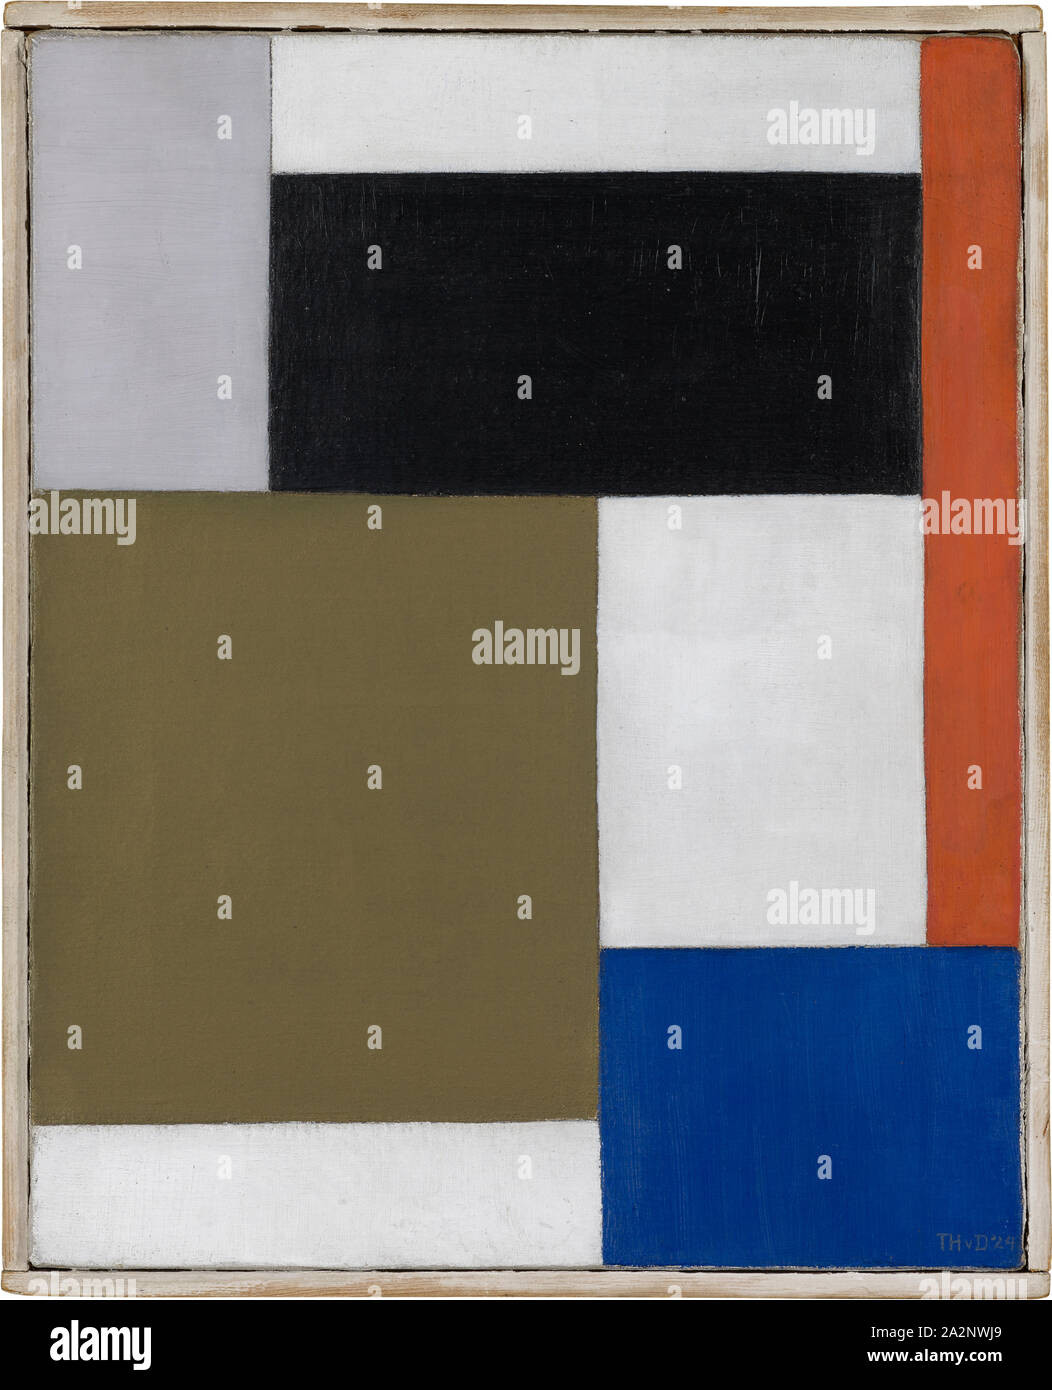 Composition, July 1923-1924, oil on canvas, 41.5 x 33.4 cm, signed lower right: TH v D '24, inscribed on the back of the stretcher by the artist (?): THEO VAN DOESBURG and indication of the image orientation with two arrows and HAUT, Theo van Doesburg, Utrecht 1883–1931 Davos/Graubünden Stock Photo